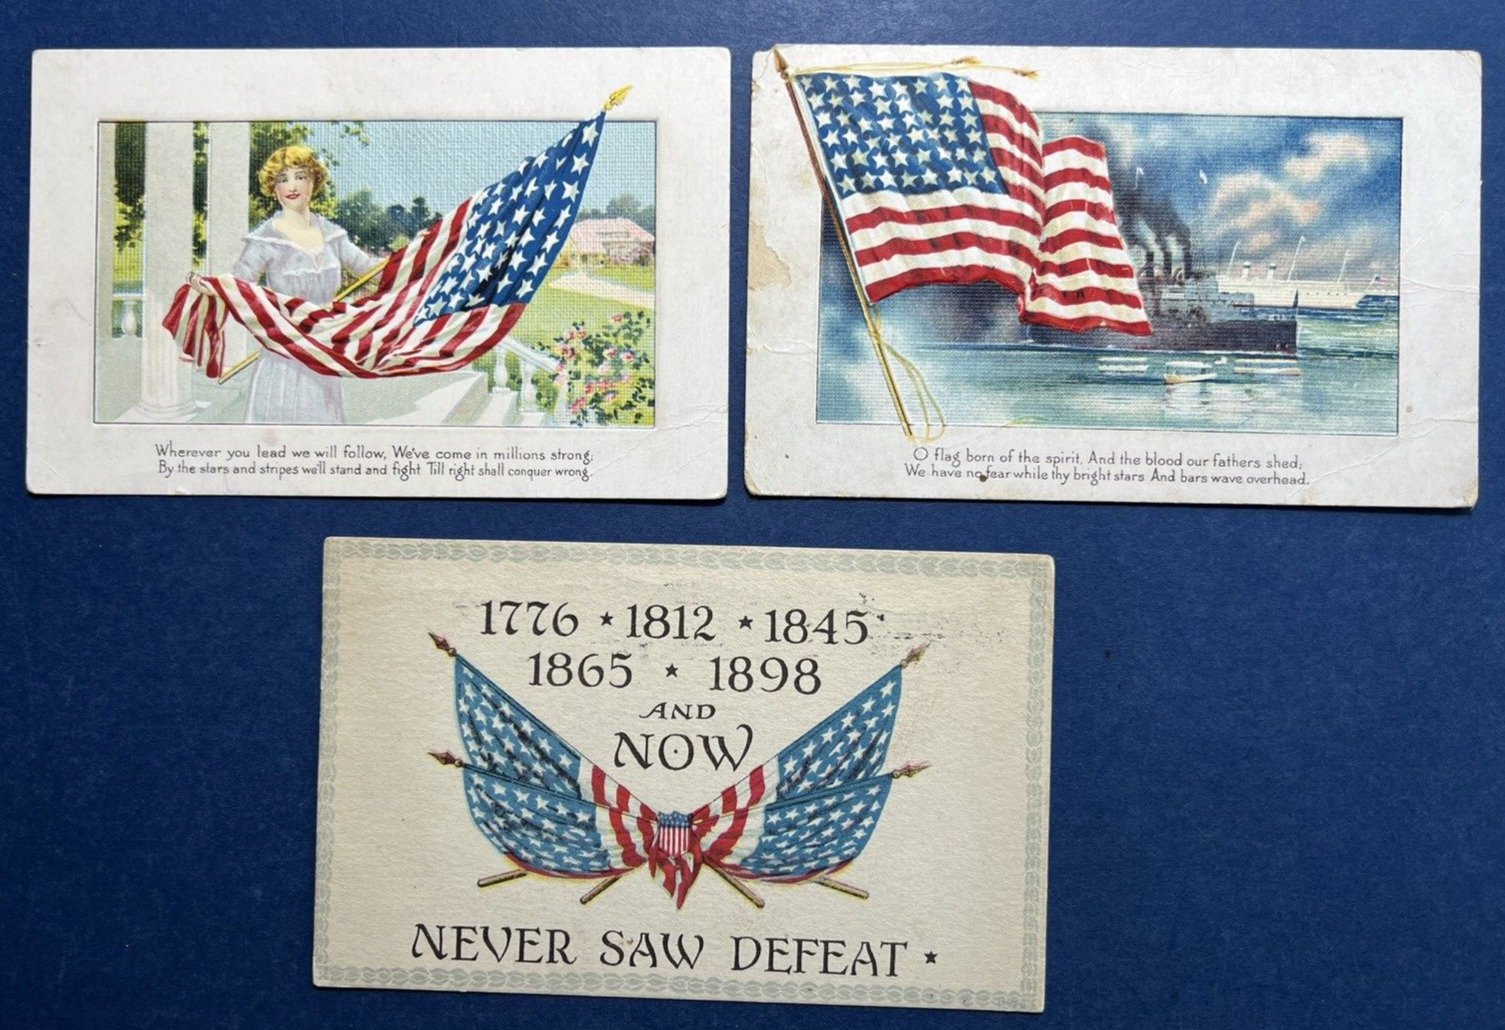 3 USA Flags Antique Patriotic Postcards. WWI era. Ships, Lady, Flags. 2 are set